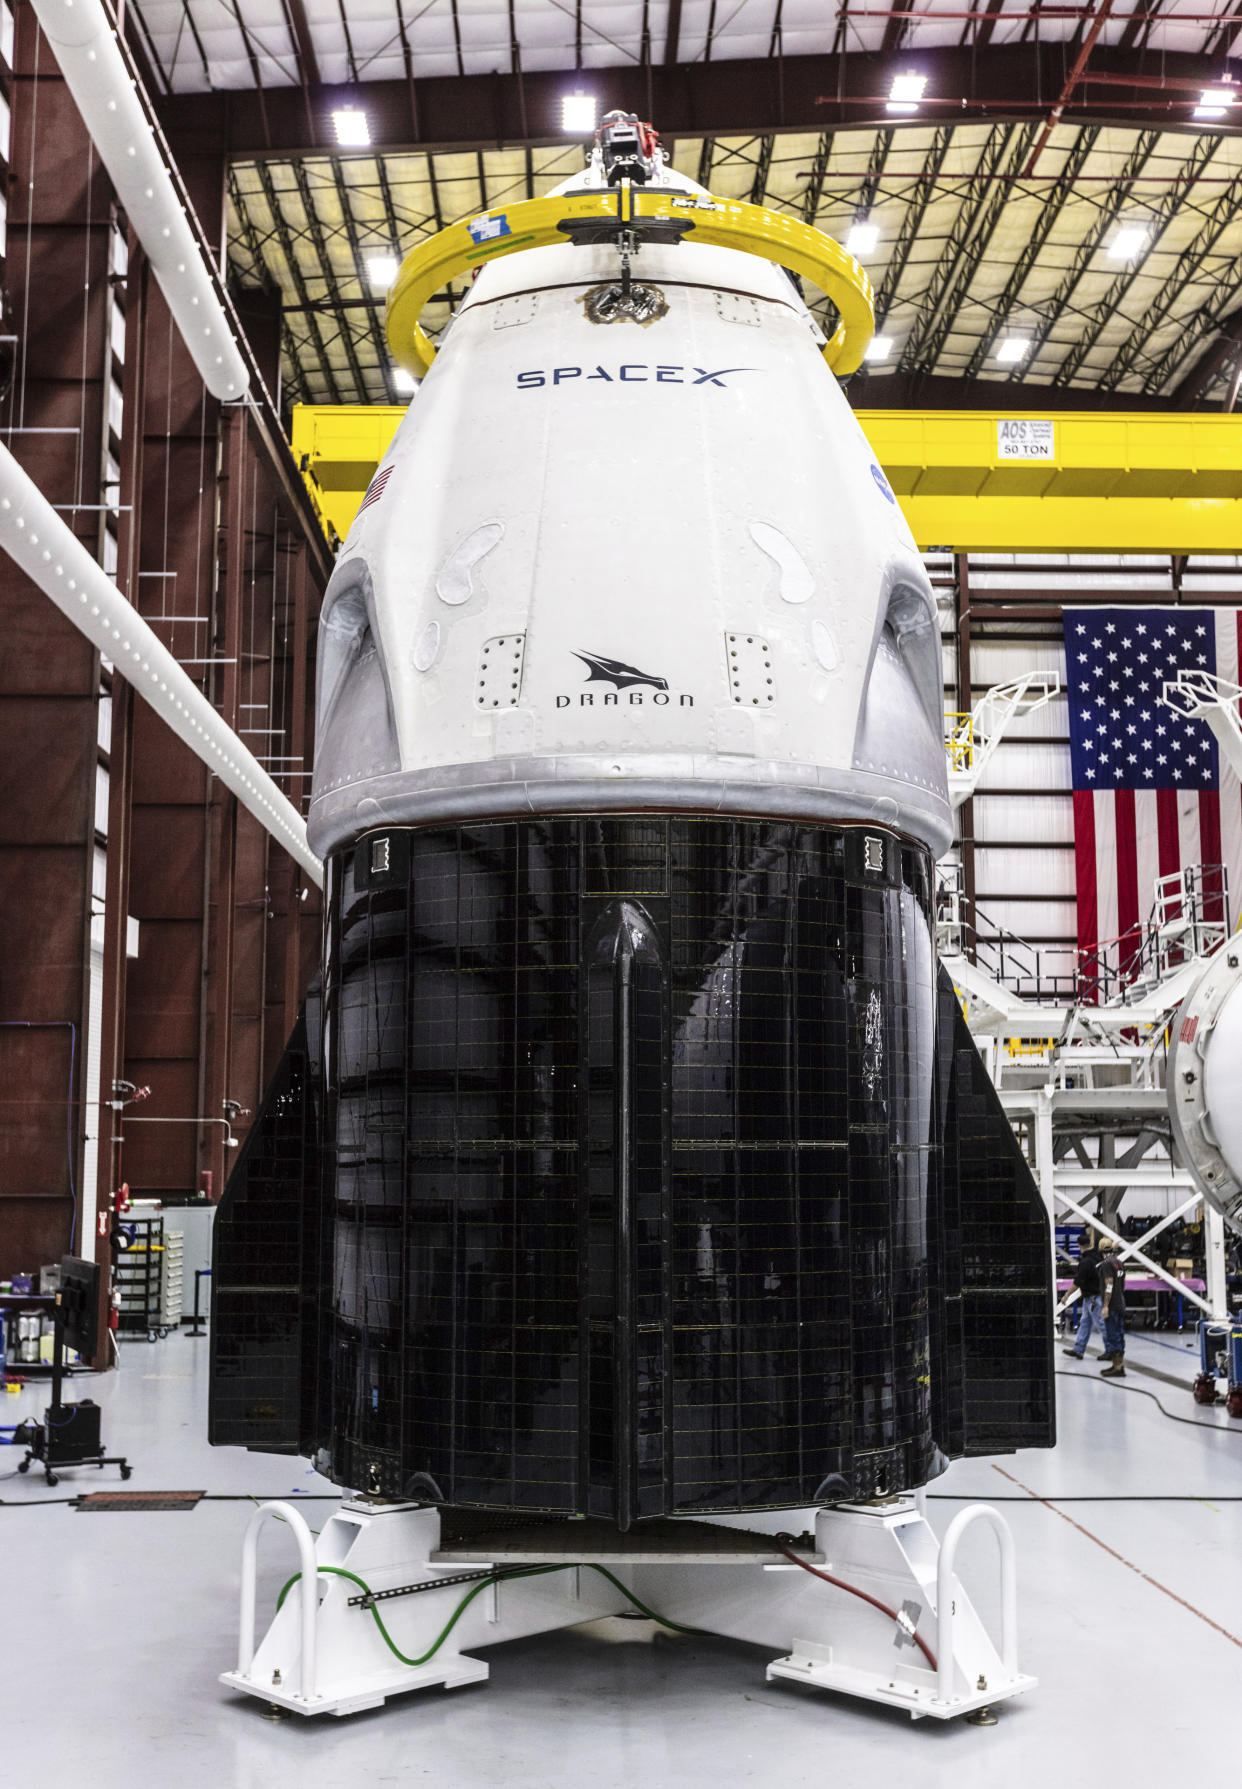 SpaceX’s Crew Dragon spacecraft and Falcon 9 rocket are positioned inside the company’s hangar at Launch Complex 39A at NASA’s Kennedy Space Center in Florida (Space X/AP)